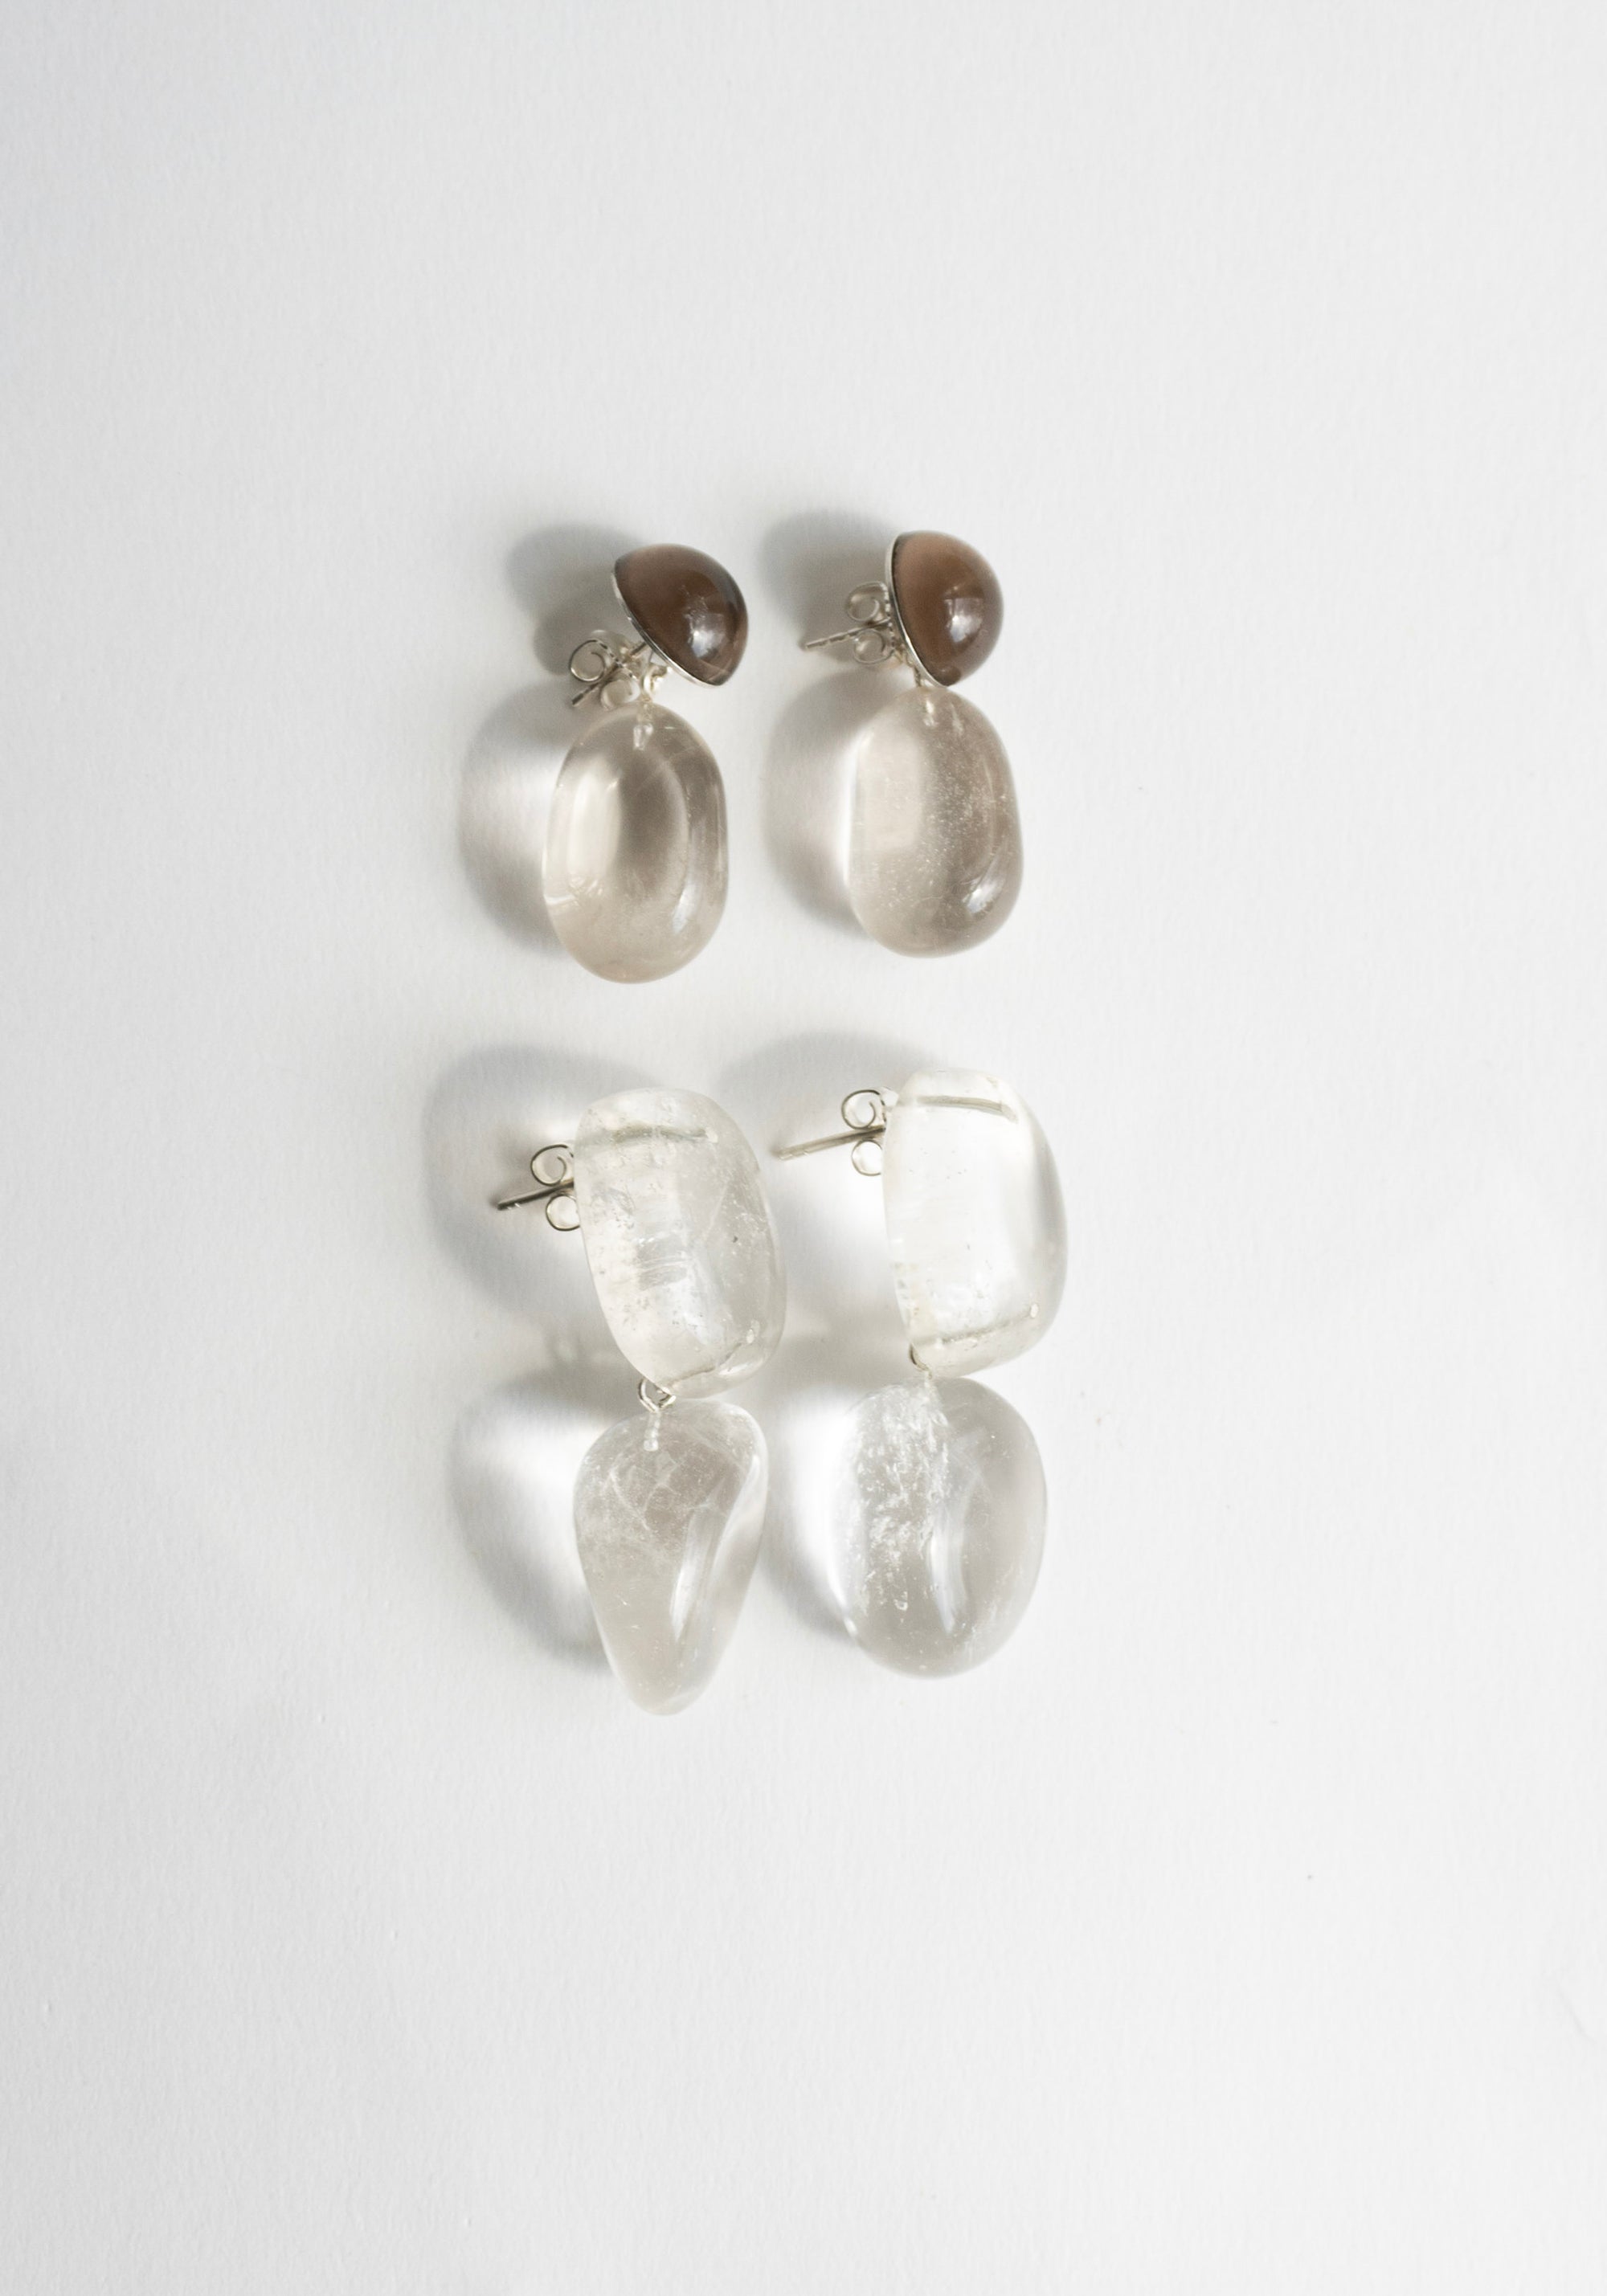 Mussels and Muscles Crystal Pebbles Earrings No.2